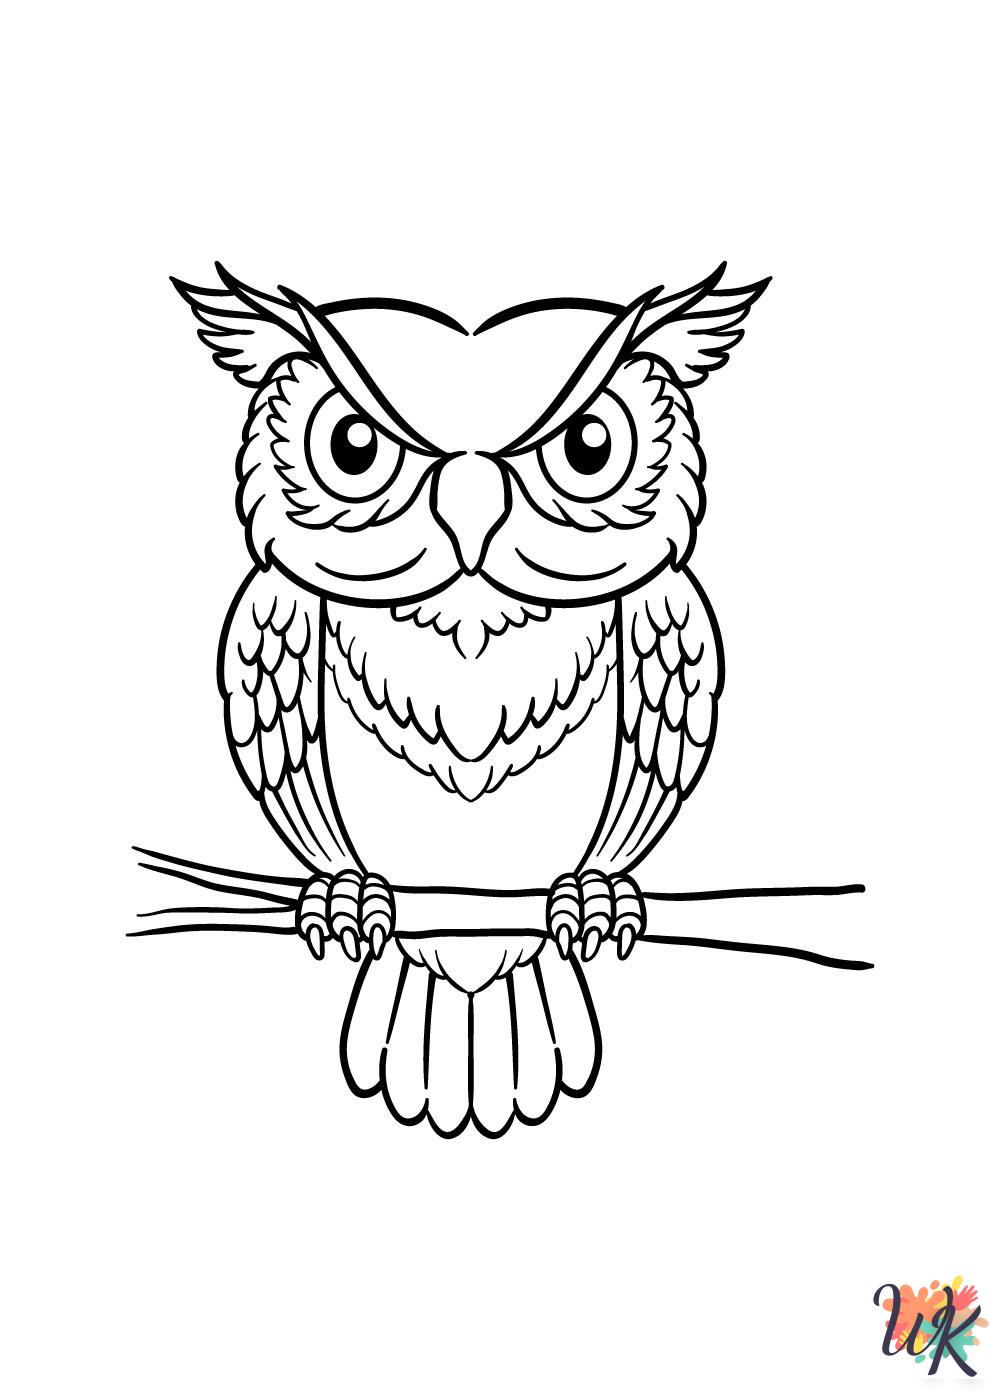 Owl coloring pages for adults easy 1